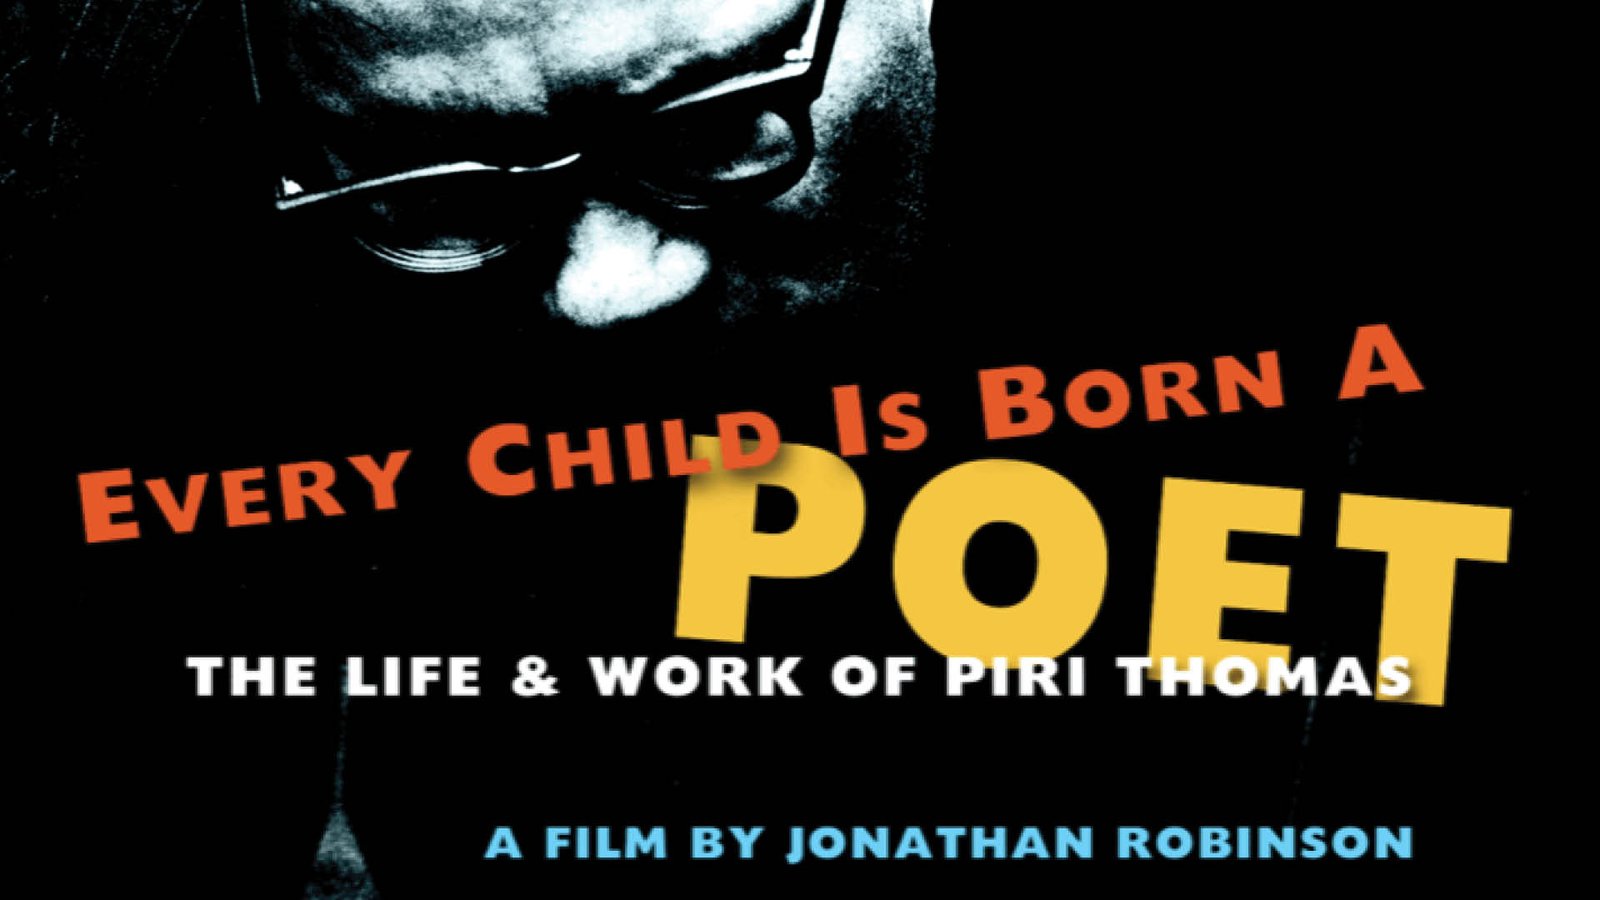 Every Child is Born A Poet - The Life and Work of Author Piri Thomas